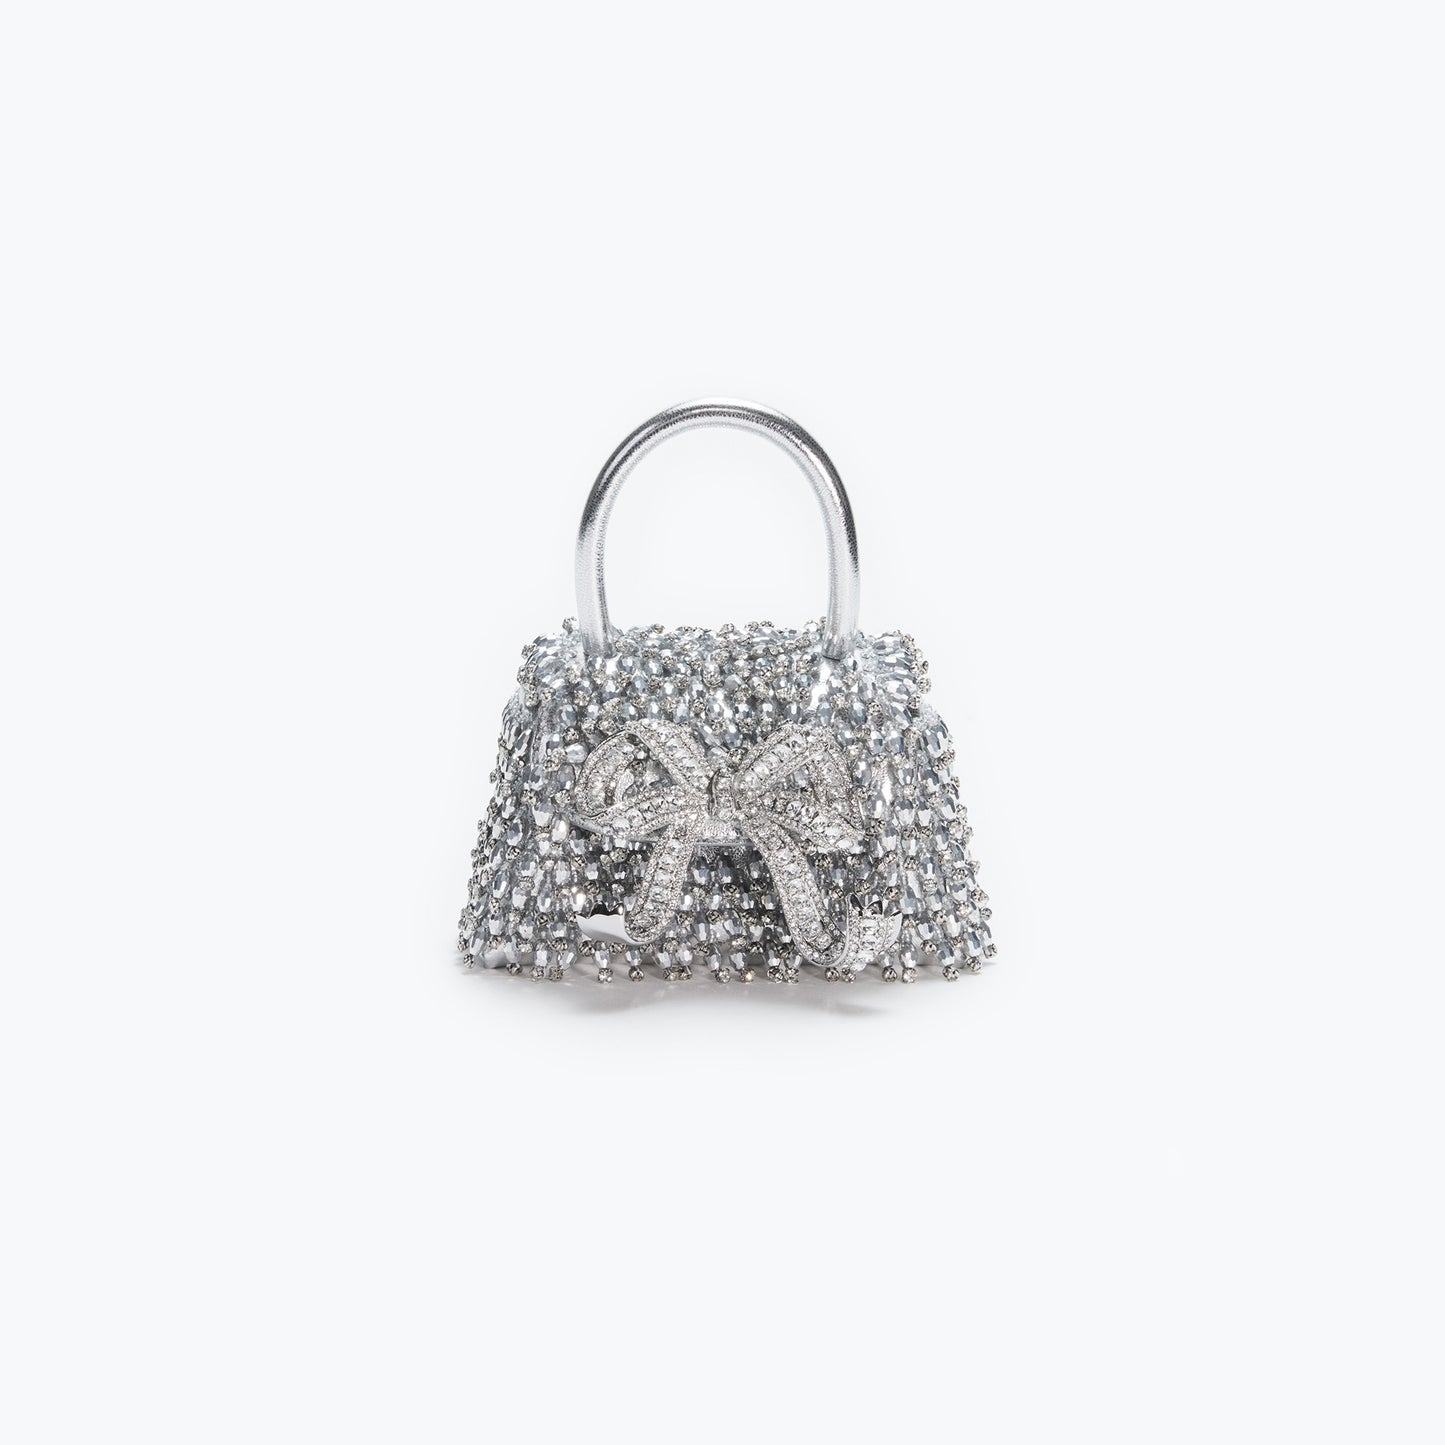 SILVER EMBALISHED BOW BAG